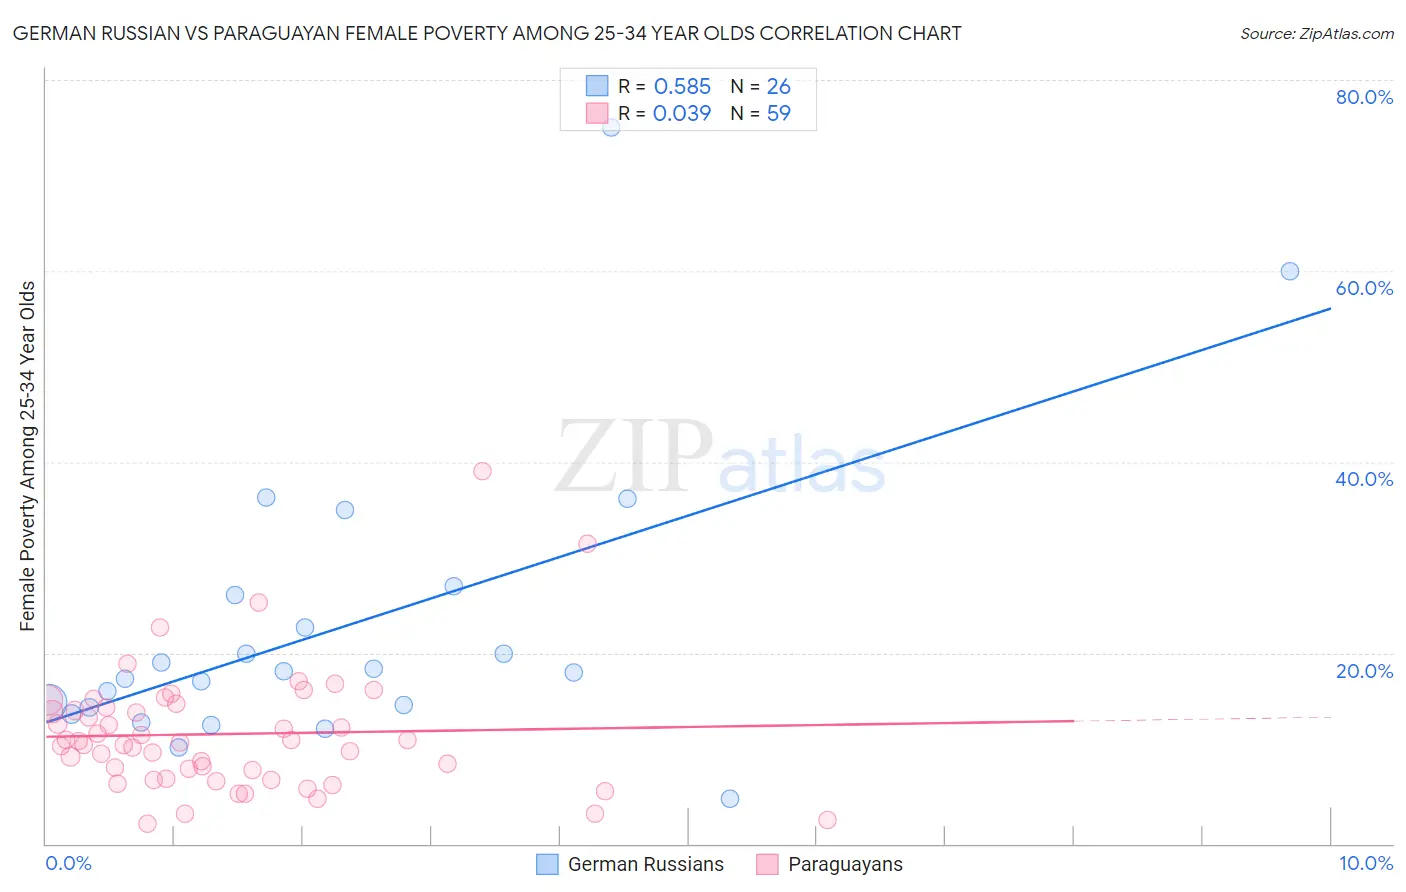 German Russian vs Paraguayan Female Poverty Among 25-34 Year Olds